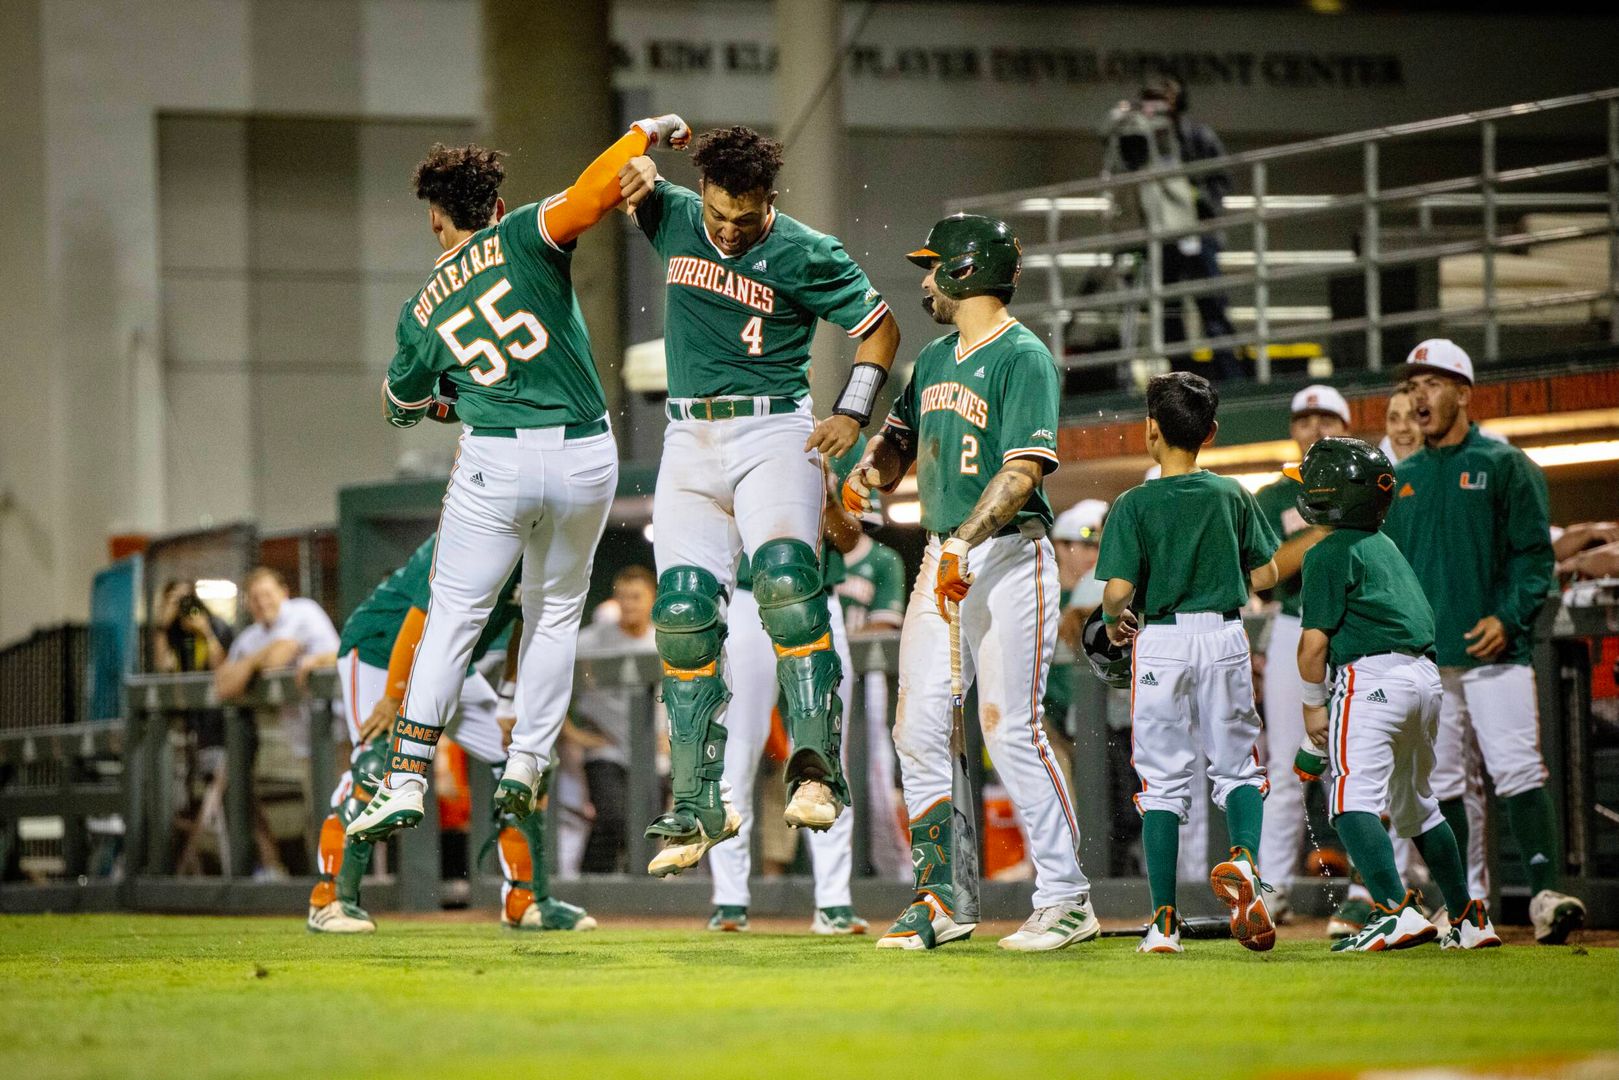 Superstitious Canes Control No. 3 Cavaliers, 6-2